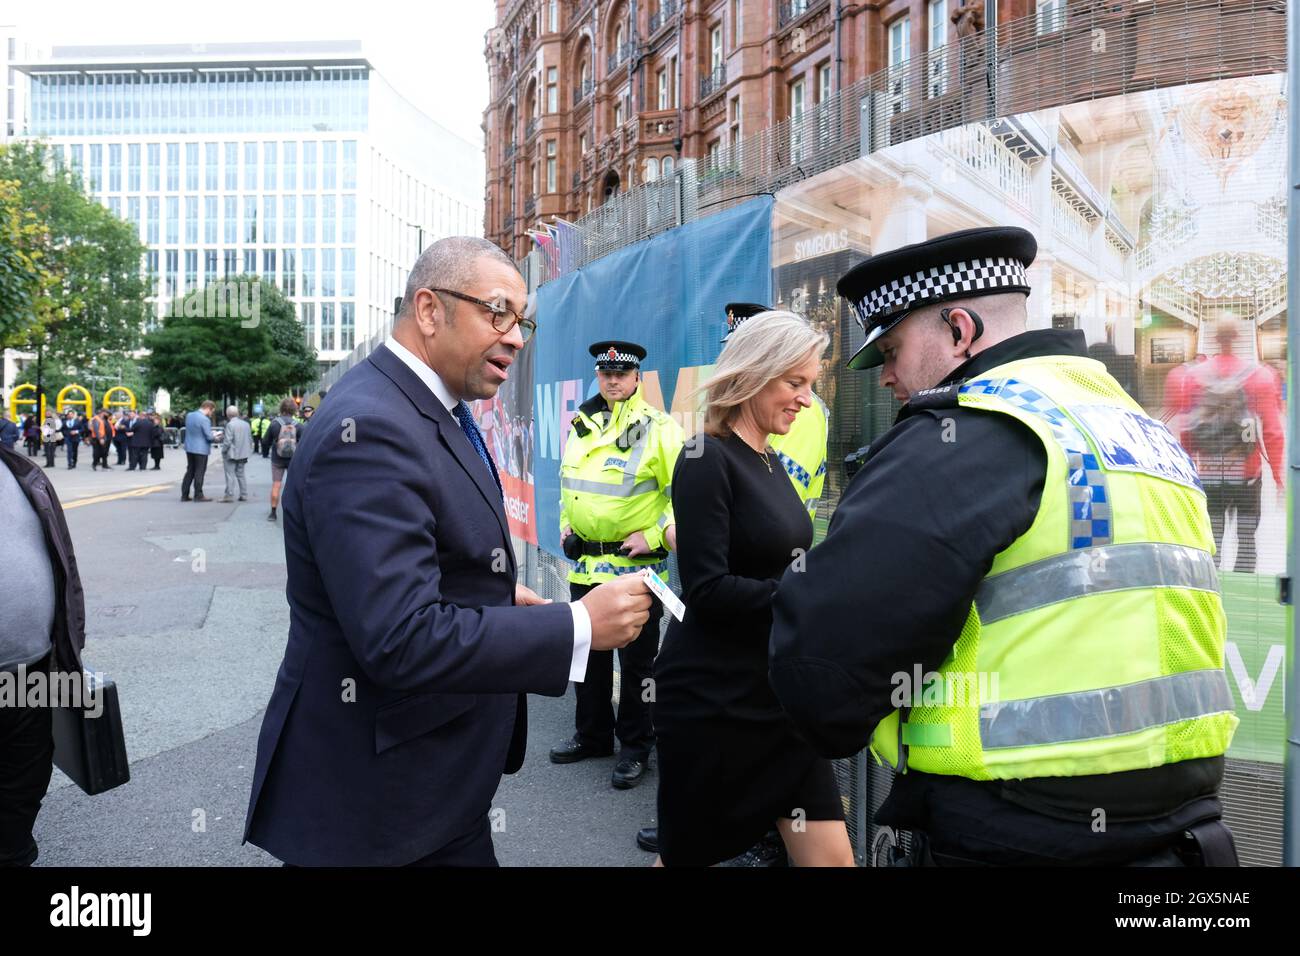 Manchester, UK – Monday 4th October 2021 – Conservative MP James Cleverly outside the Conservative Party Conference in Manchester. Photo Steven May / Alamy Live News Stock Photo